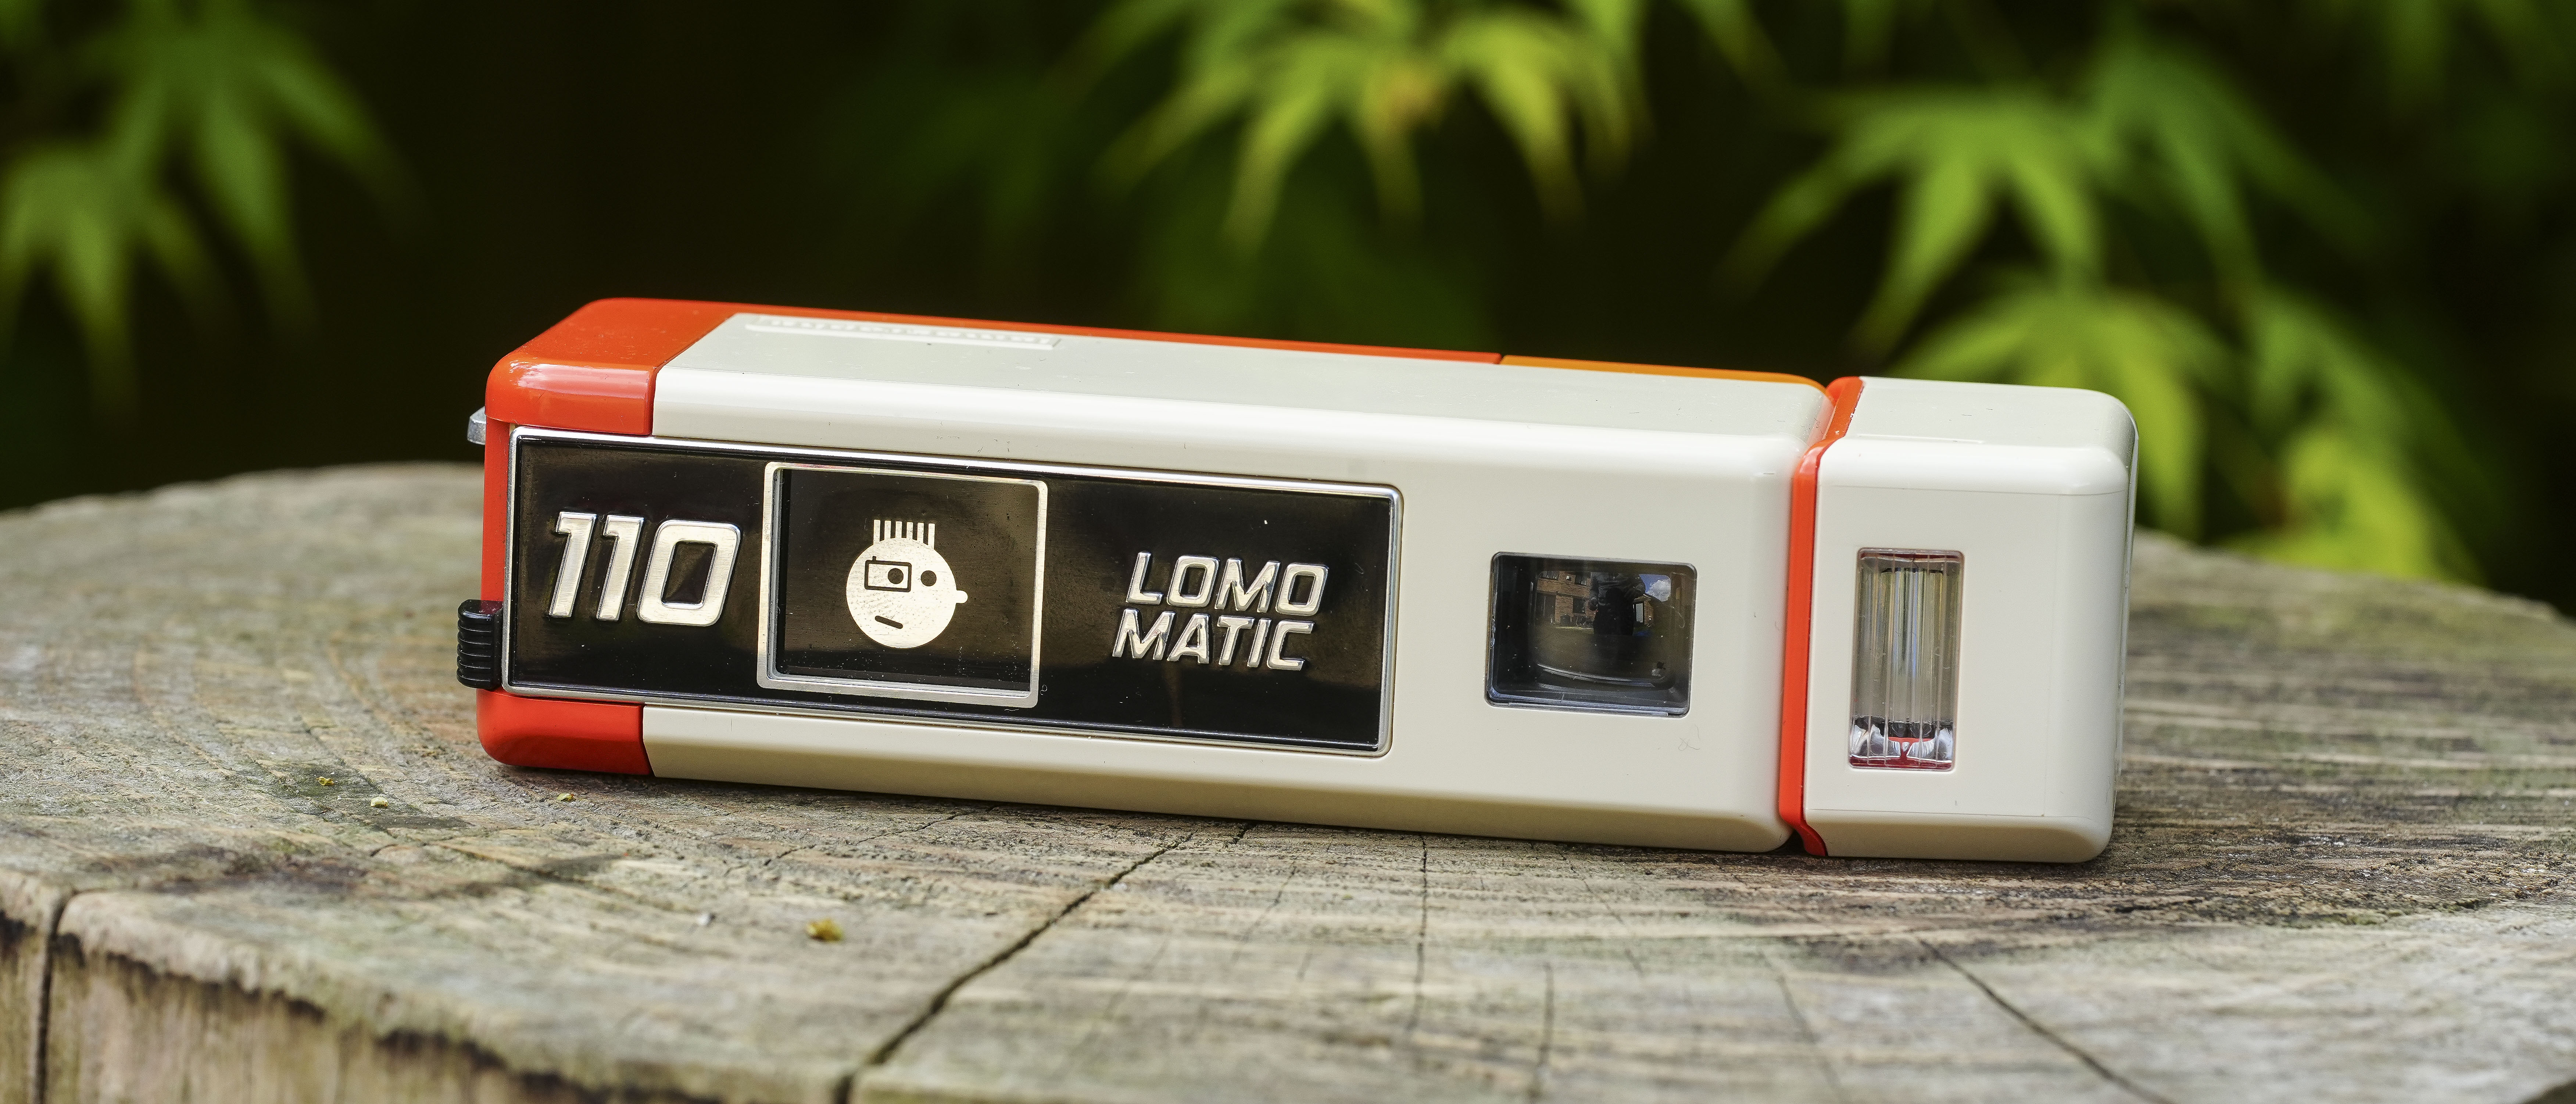 Lomography Lomomatic 110 review: Brand-new 50-year-old technology